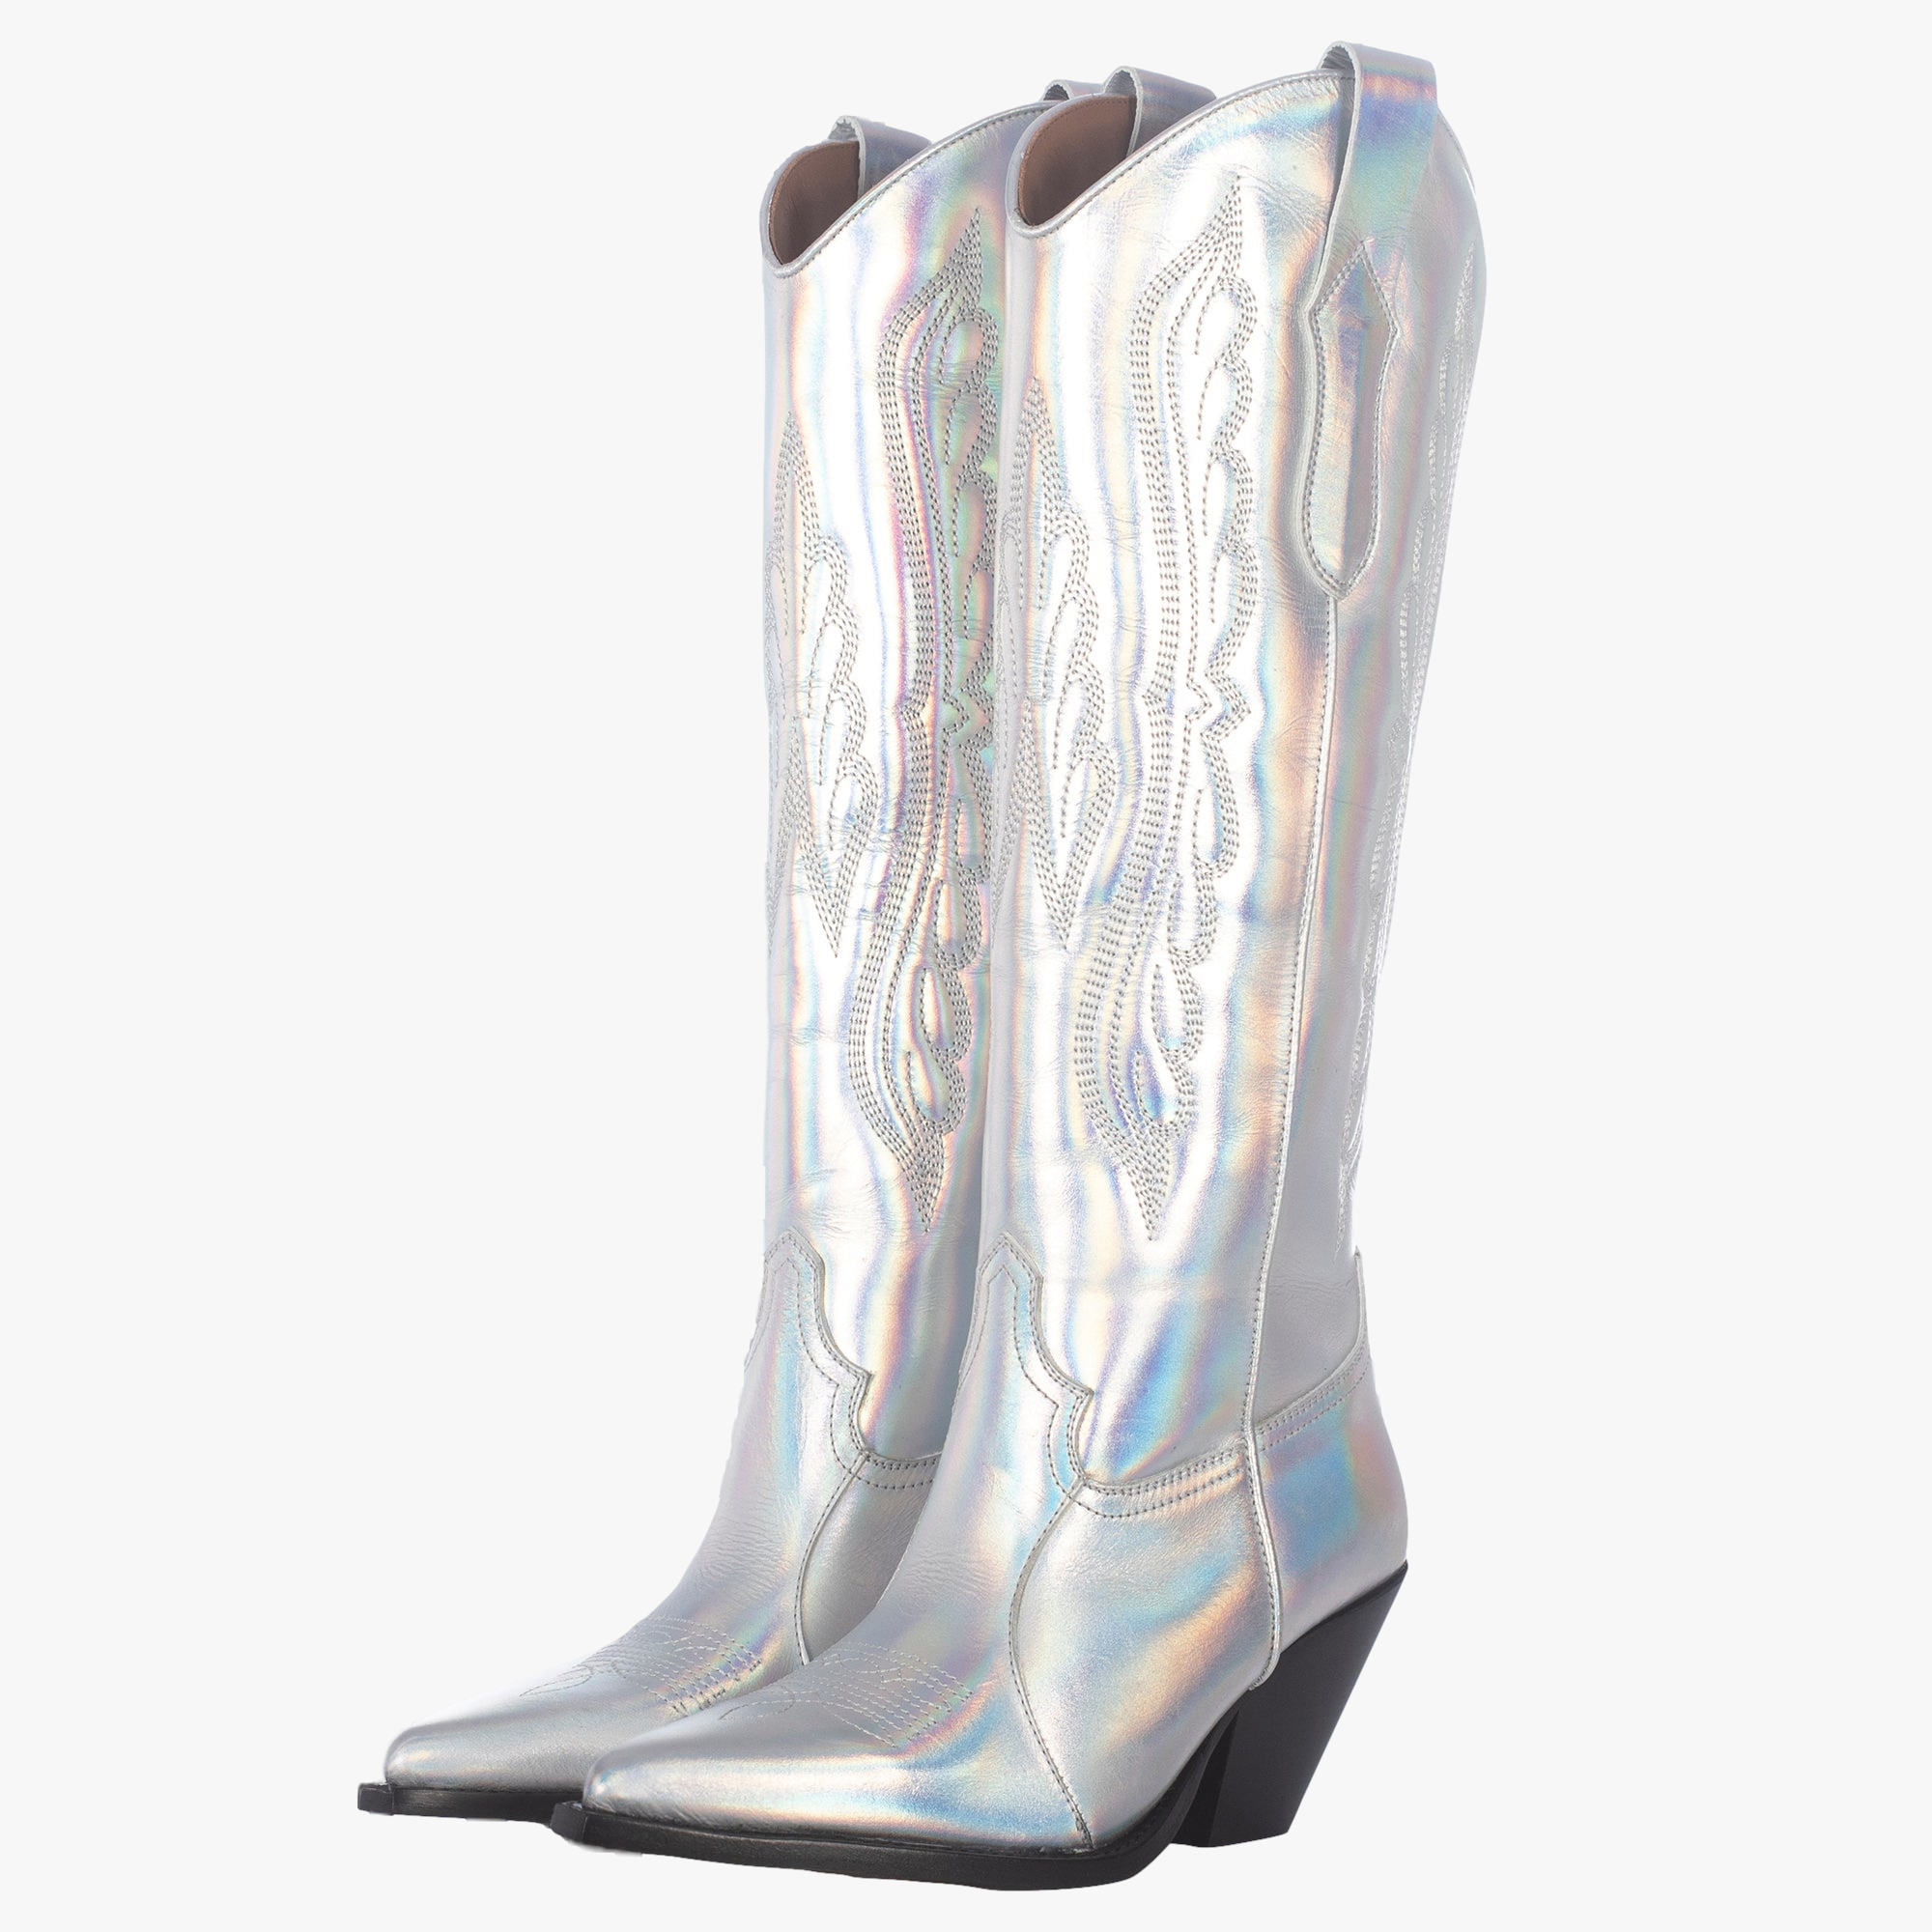 Buy Sonic Silver Toral Knee-high Boots by Toral Shoes | Seezona